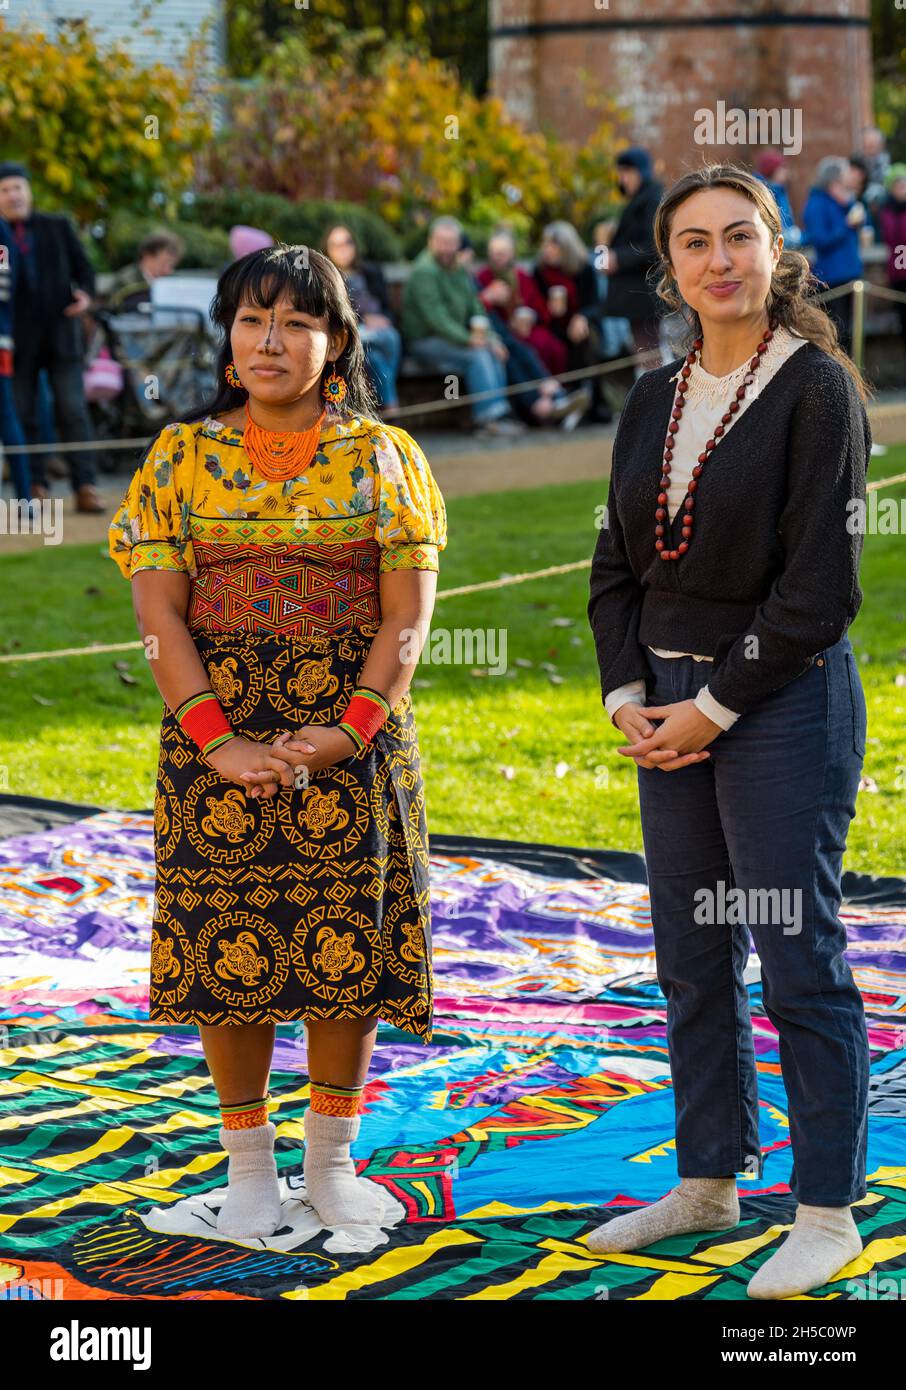 Agar Iklenia Tejeda interviewed with interpreter about applique Mola sail handsewn by indigenous Guna women from Panama at COP26, Glasgow, Scotland Stock Photo